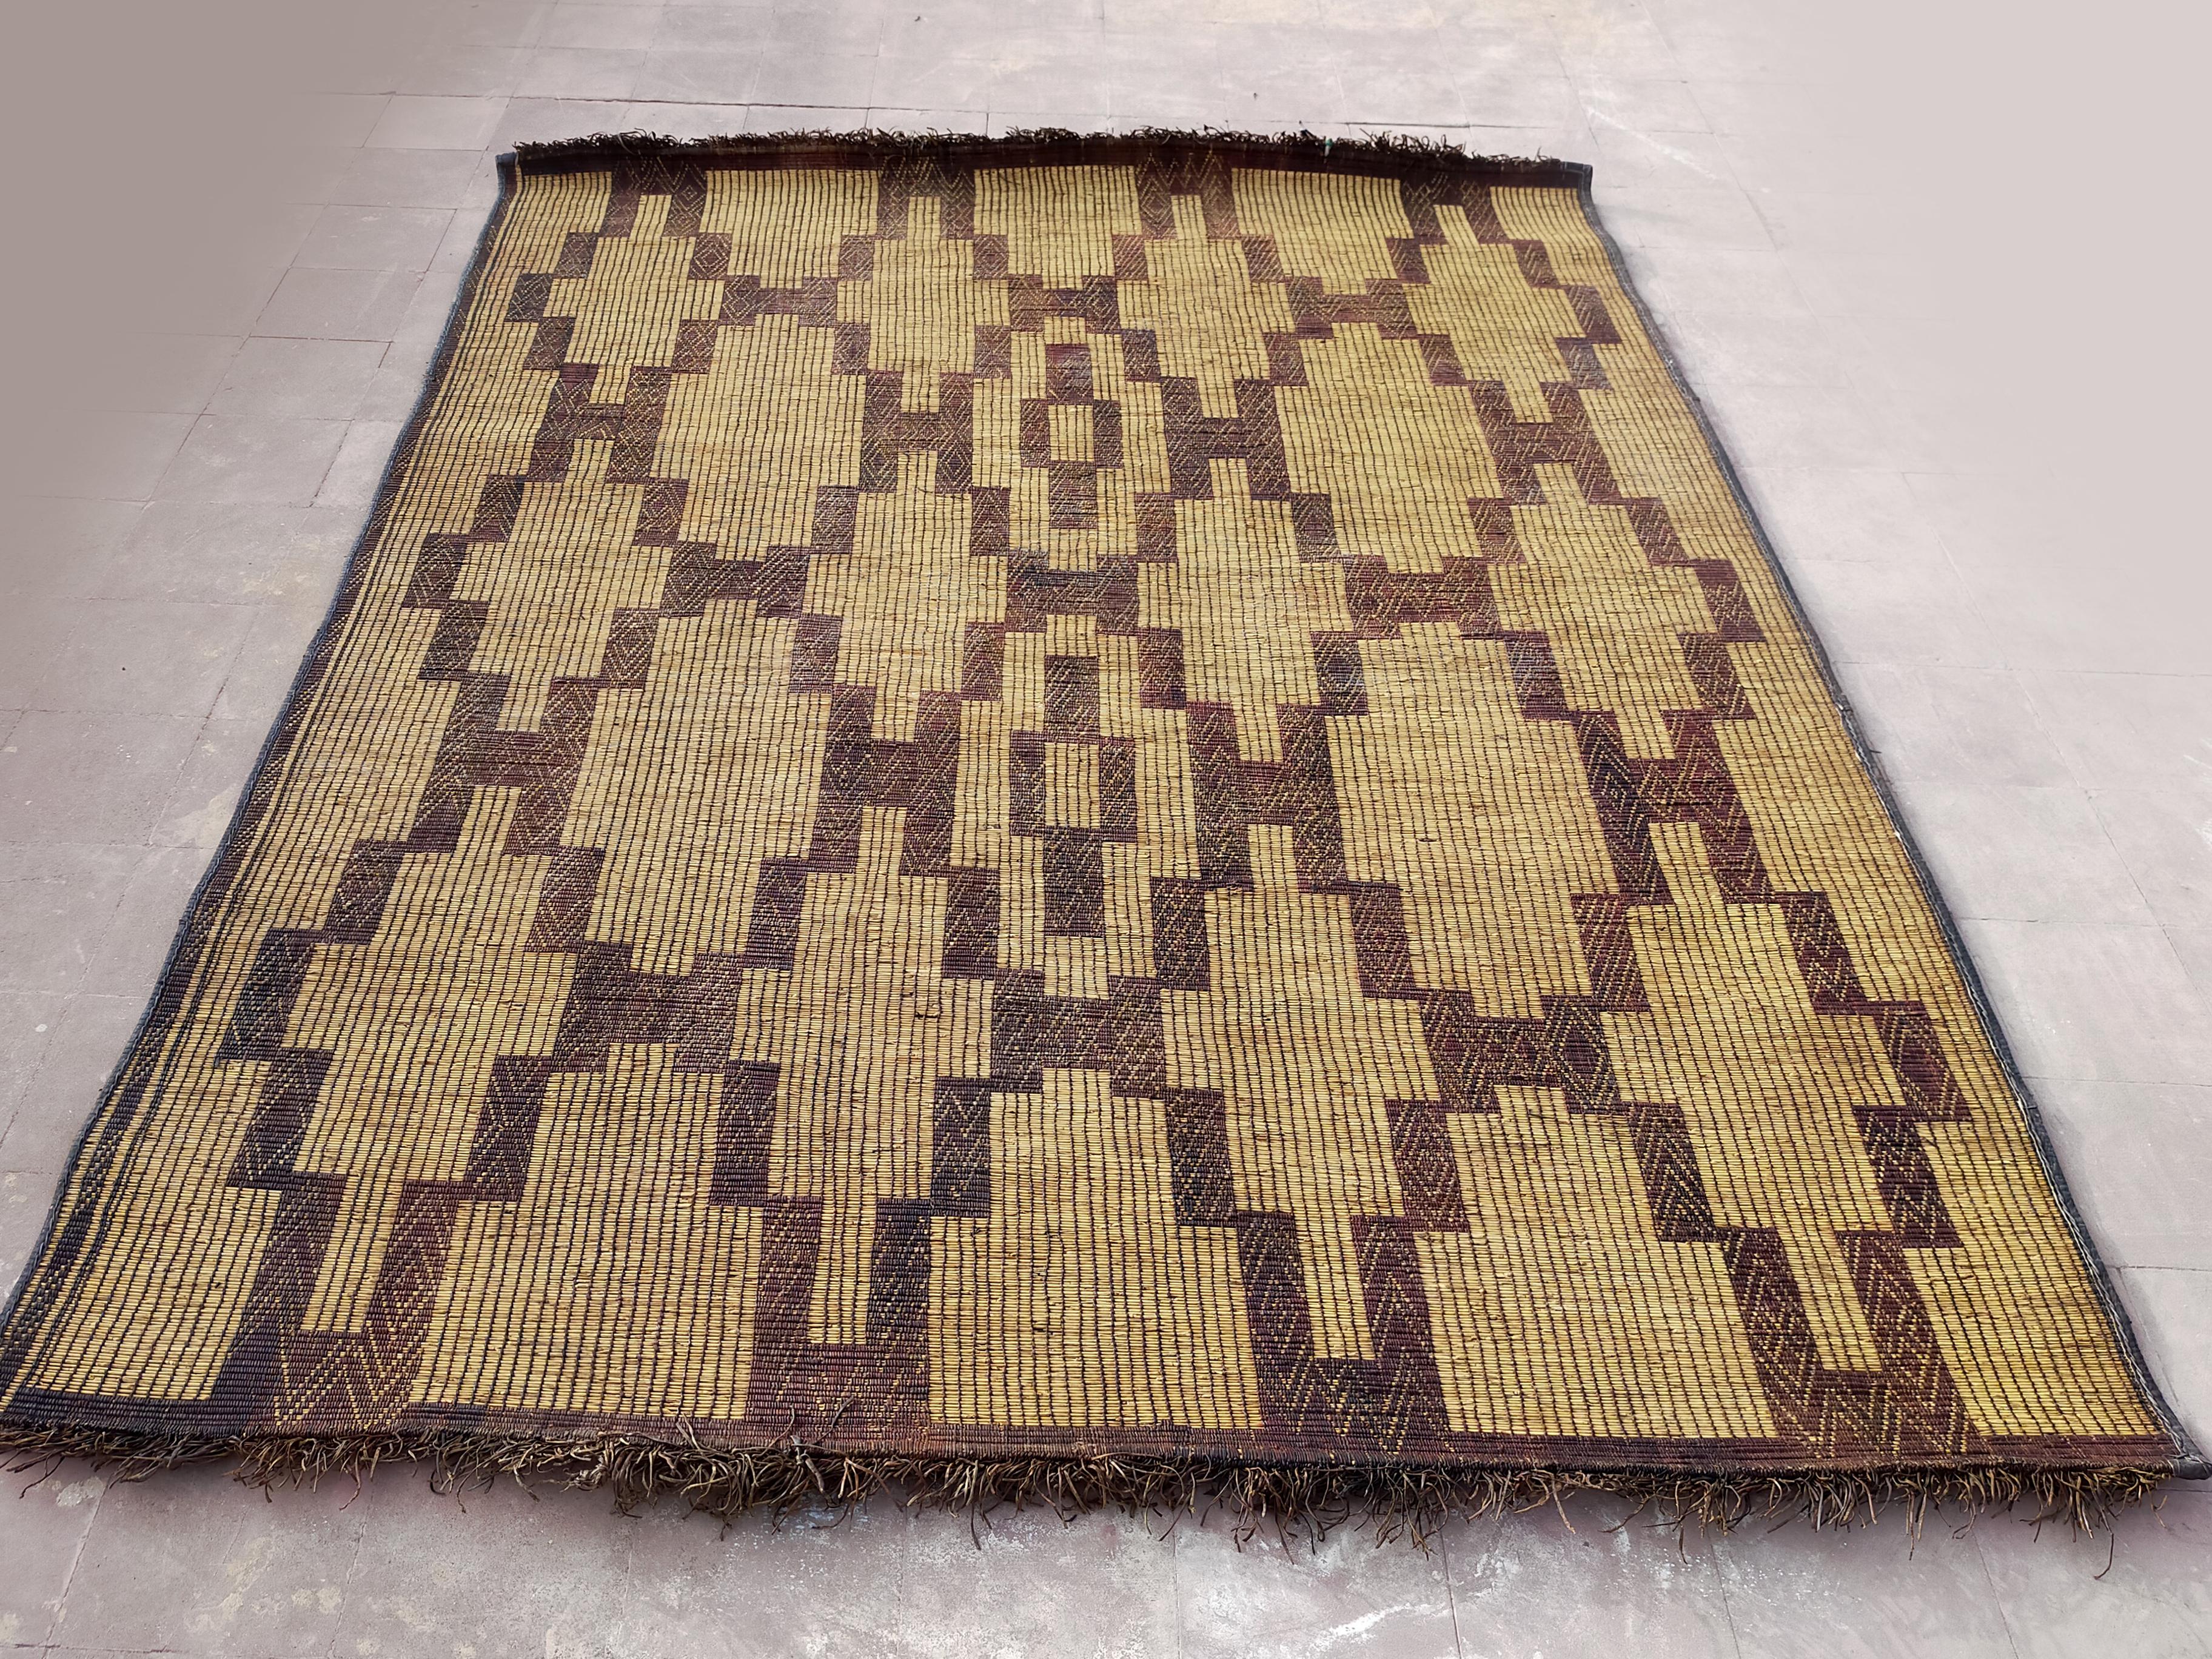 Mid-20th Century Mauritania Mat from Sahara in Leather and Palm Wood, Mid-Century Modern Design